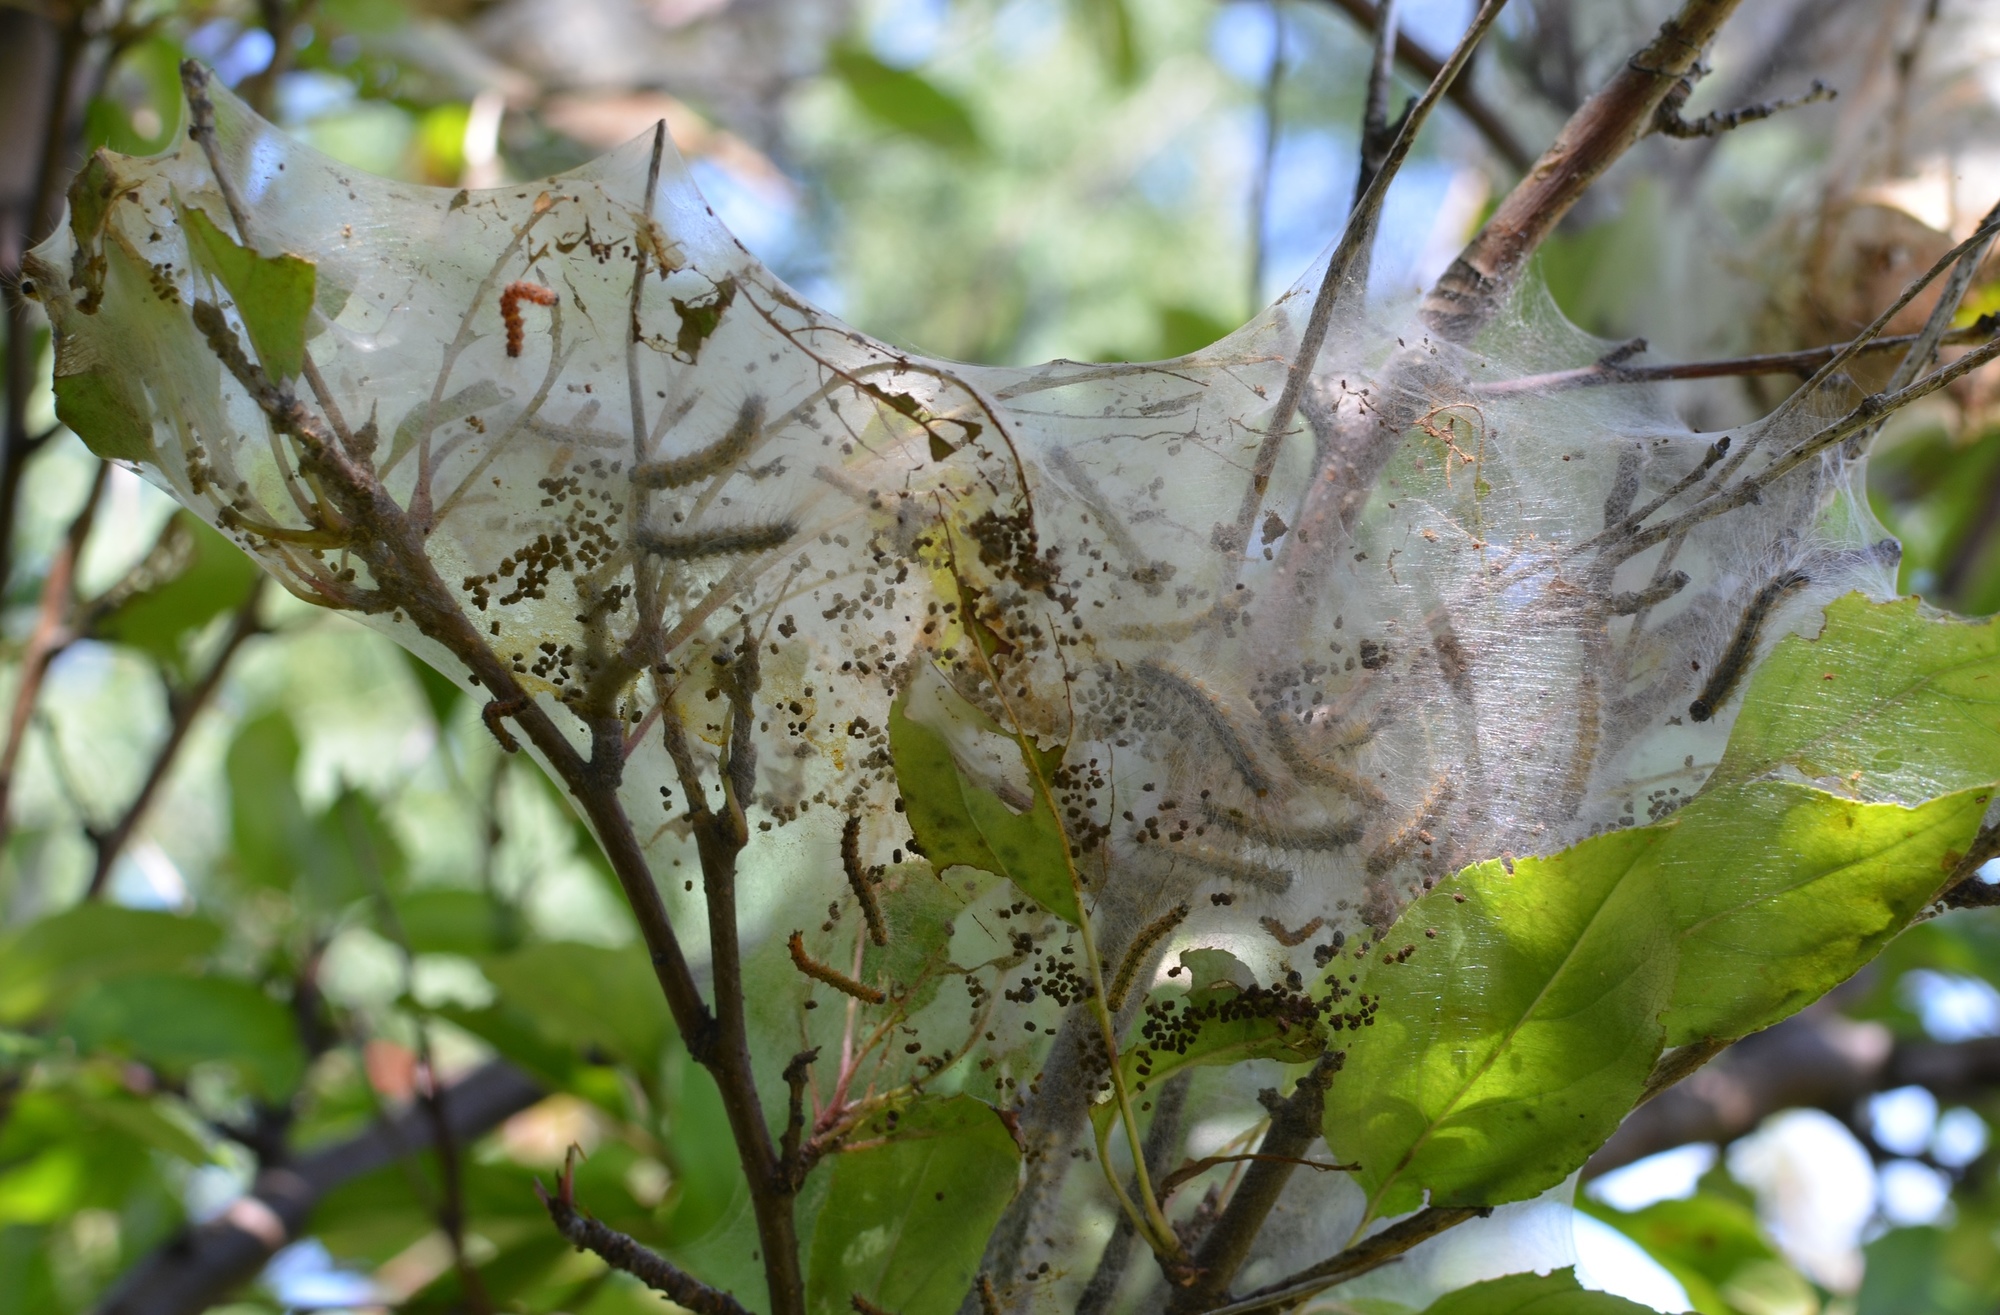 A fall webworm webbing over leaves with worms present.